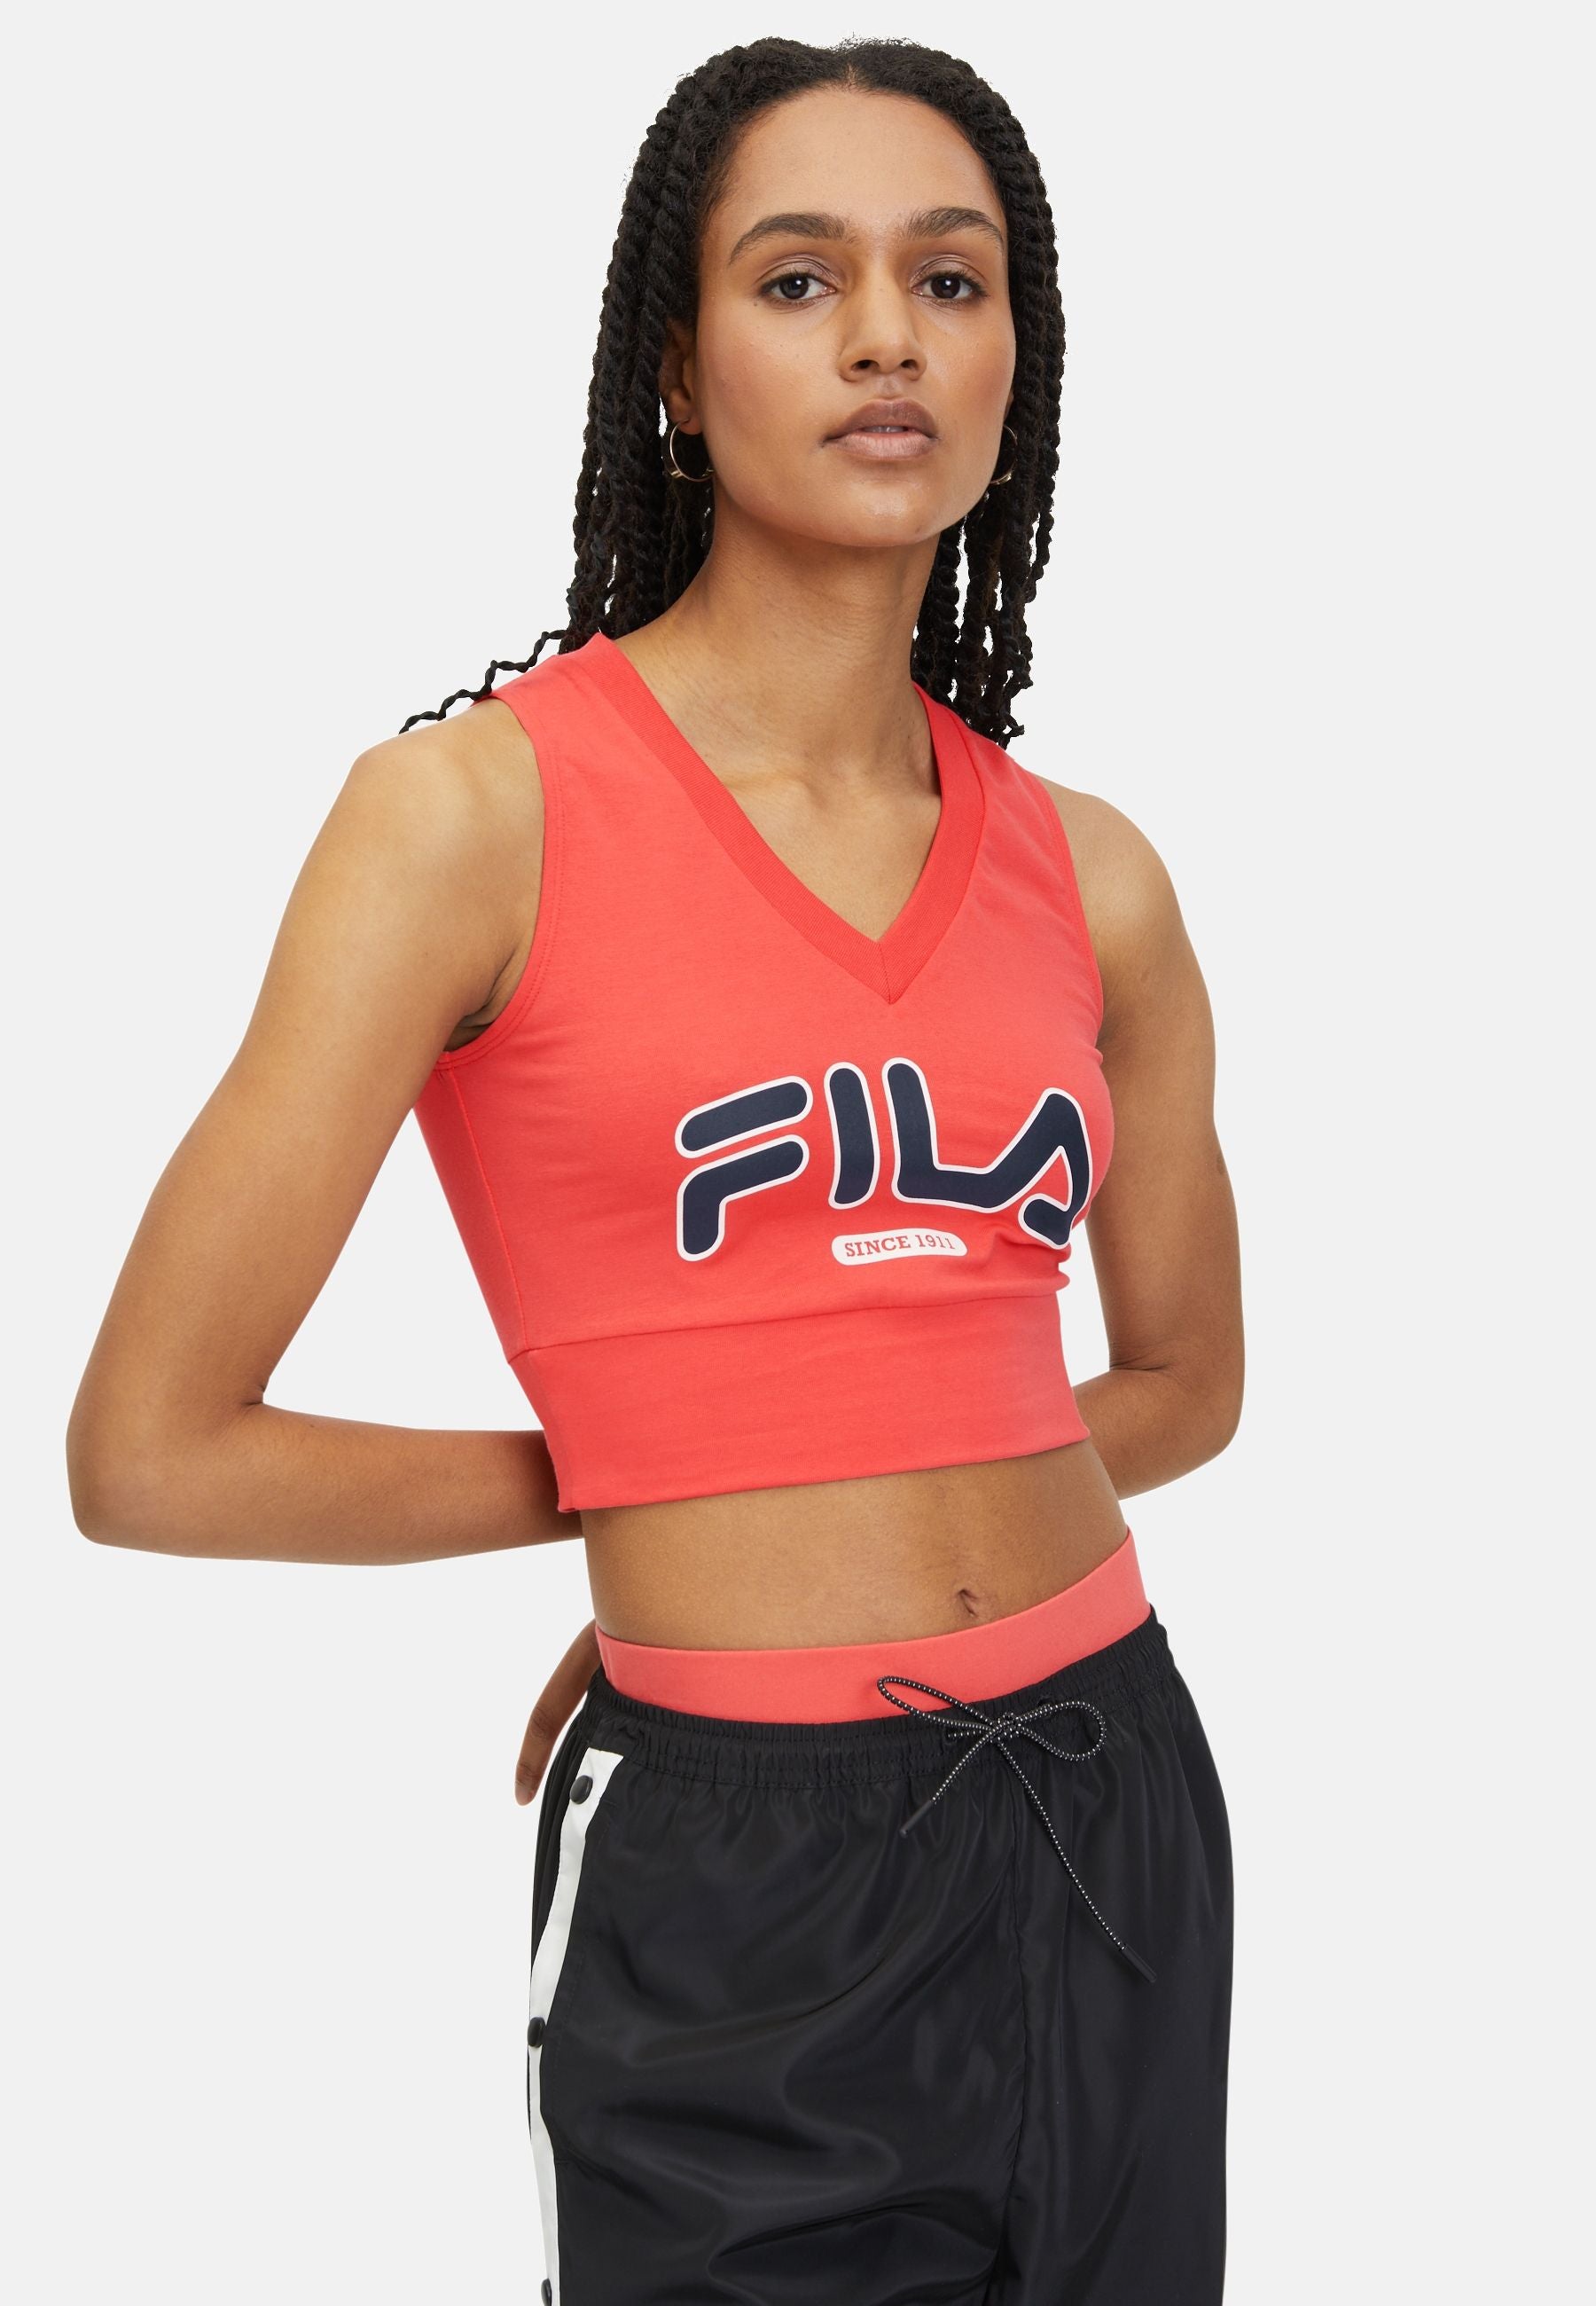 Laixi Cropped V-Neck Top in Cayenne Tops Fila   